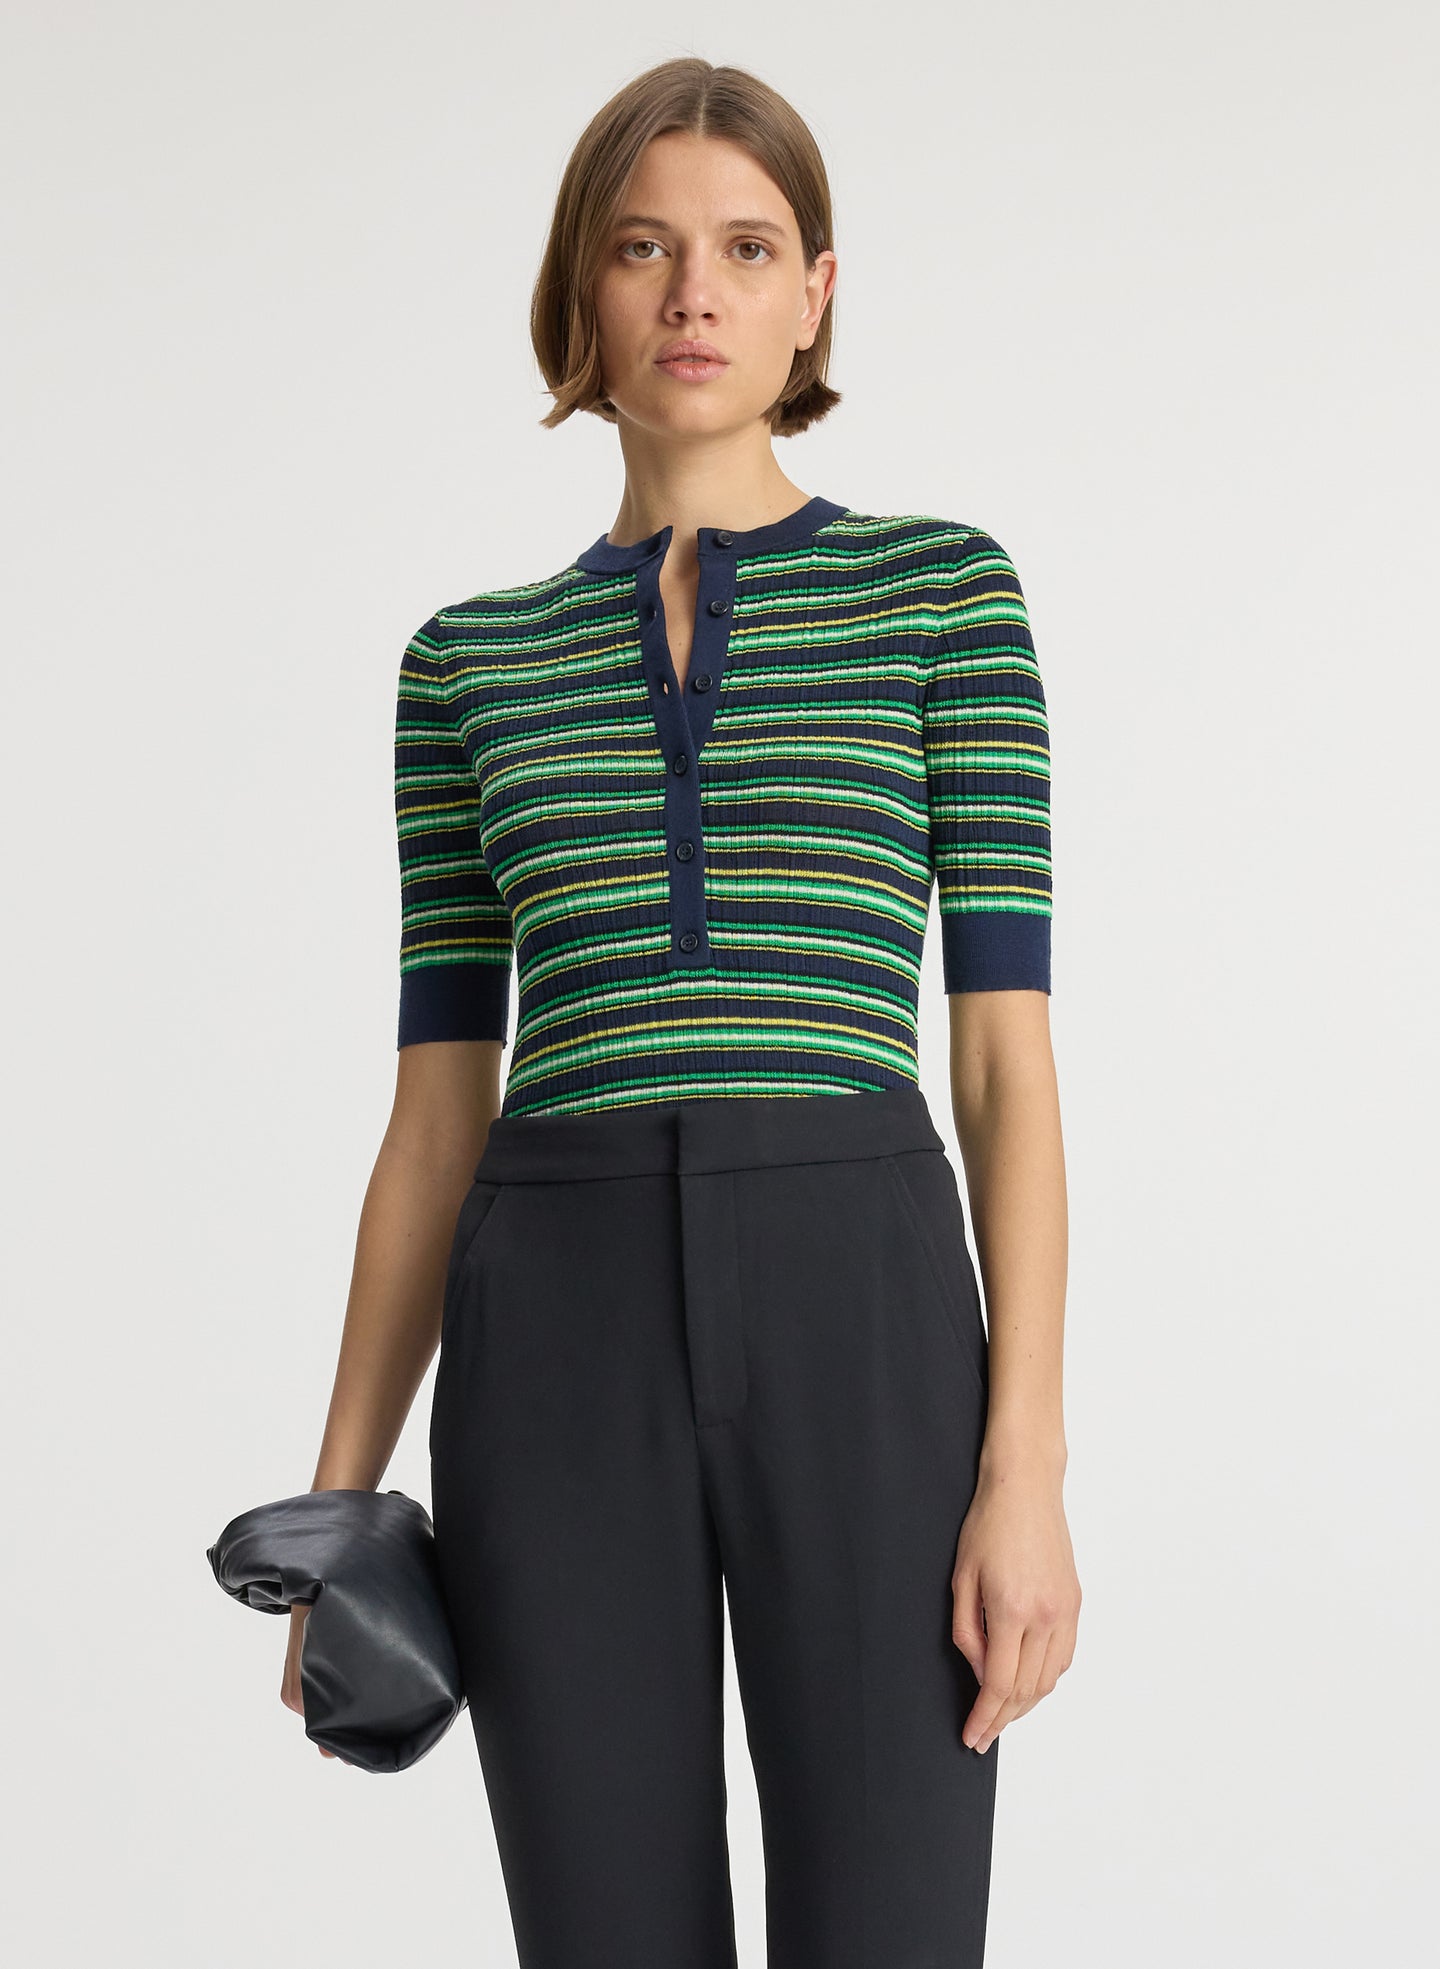 detail  view of woman wearing navy blue and green striped half sleeve button placket shirt and black pant